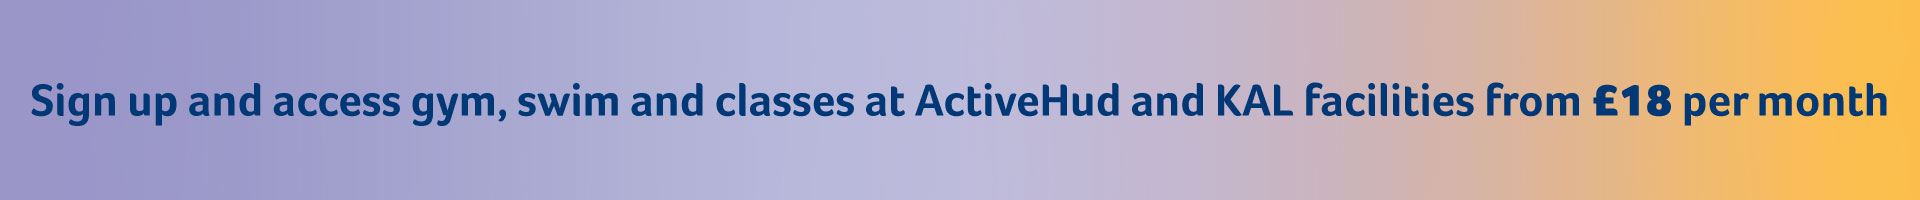 Sign up and access gym, swim and classes at ActiveHud and KAL facilities from £18 per month